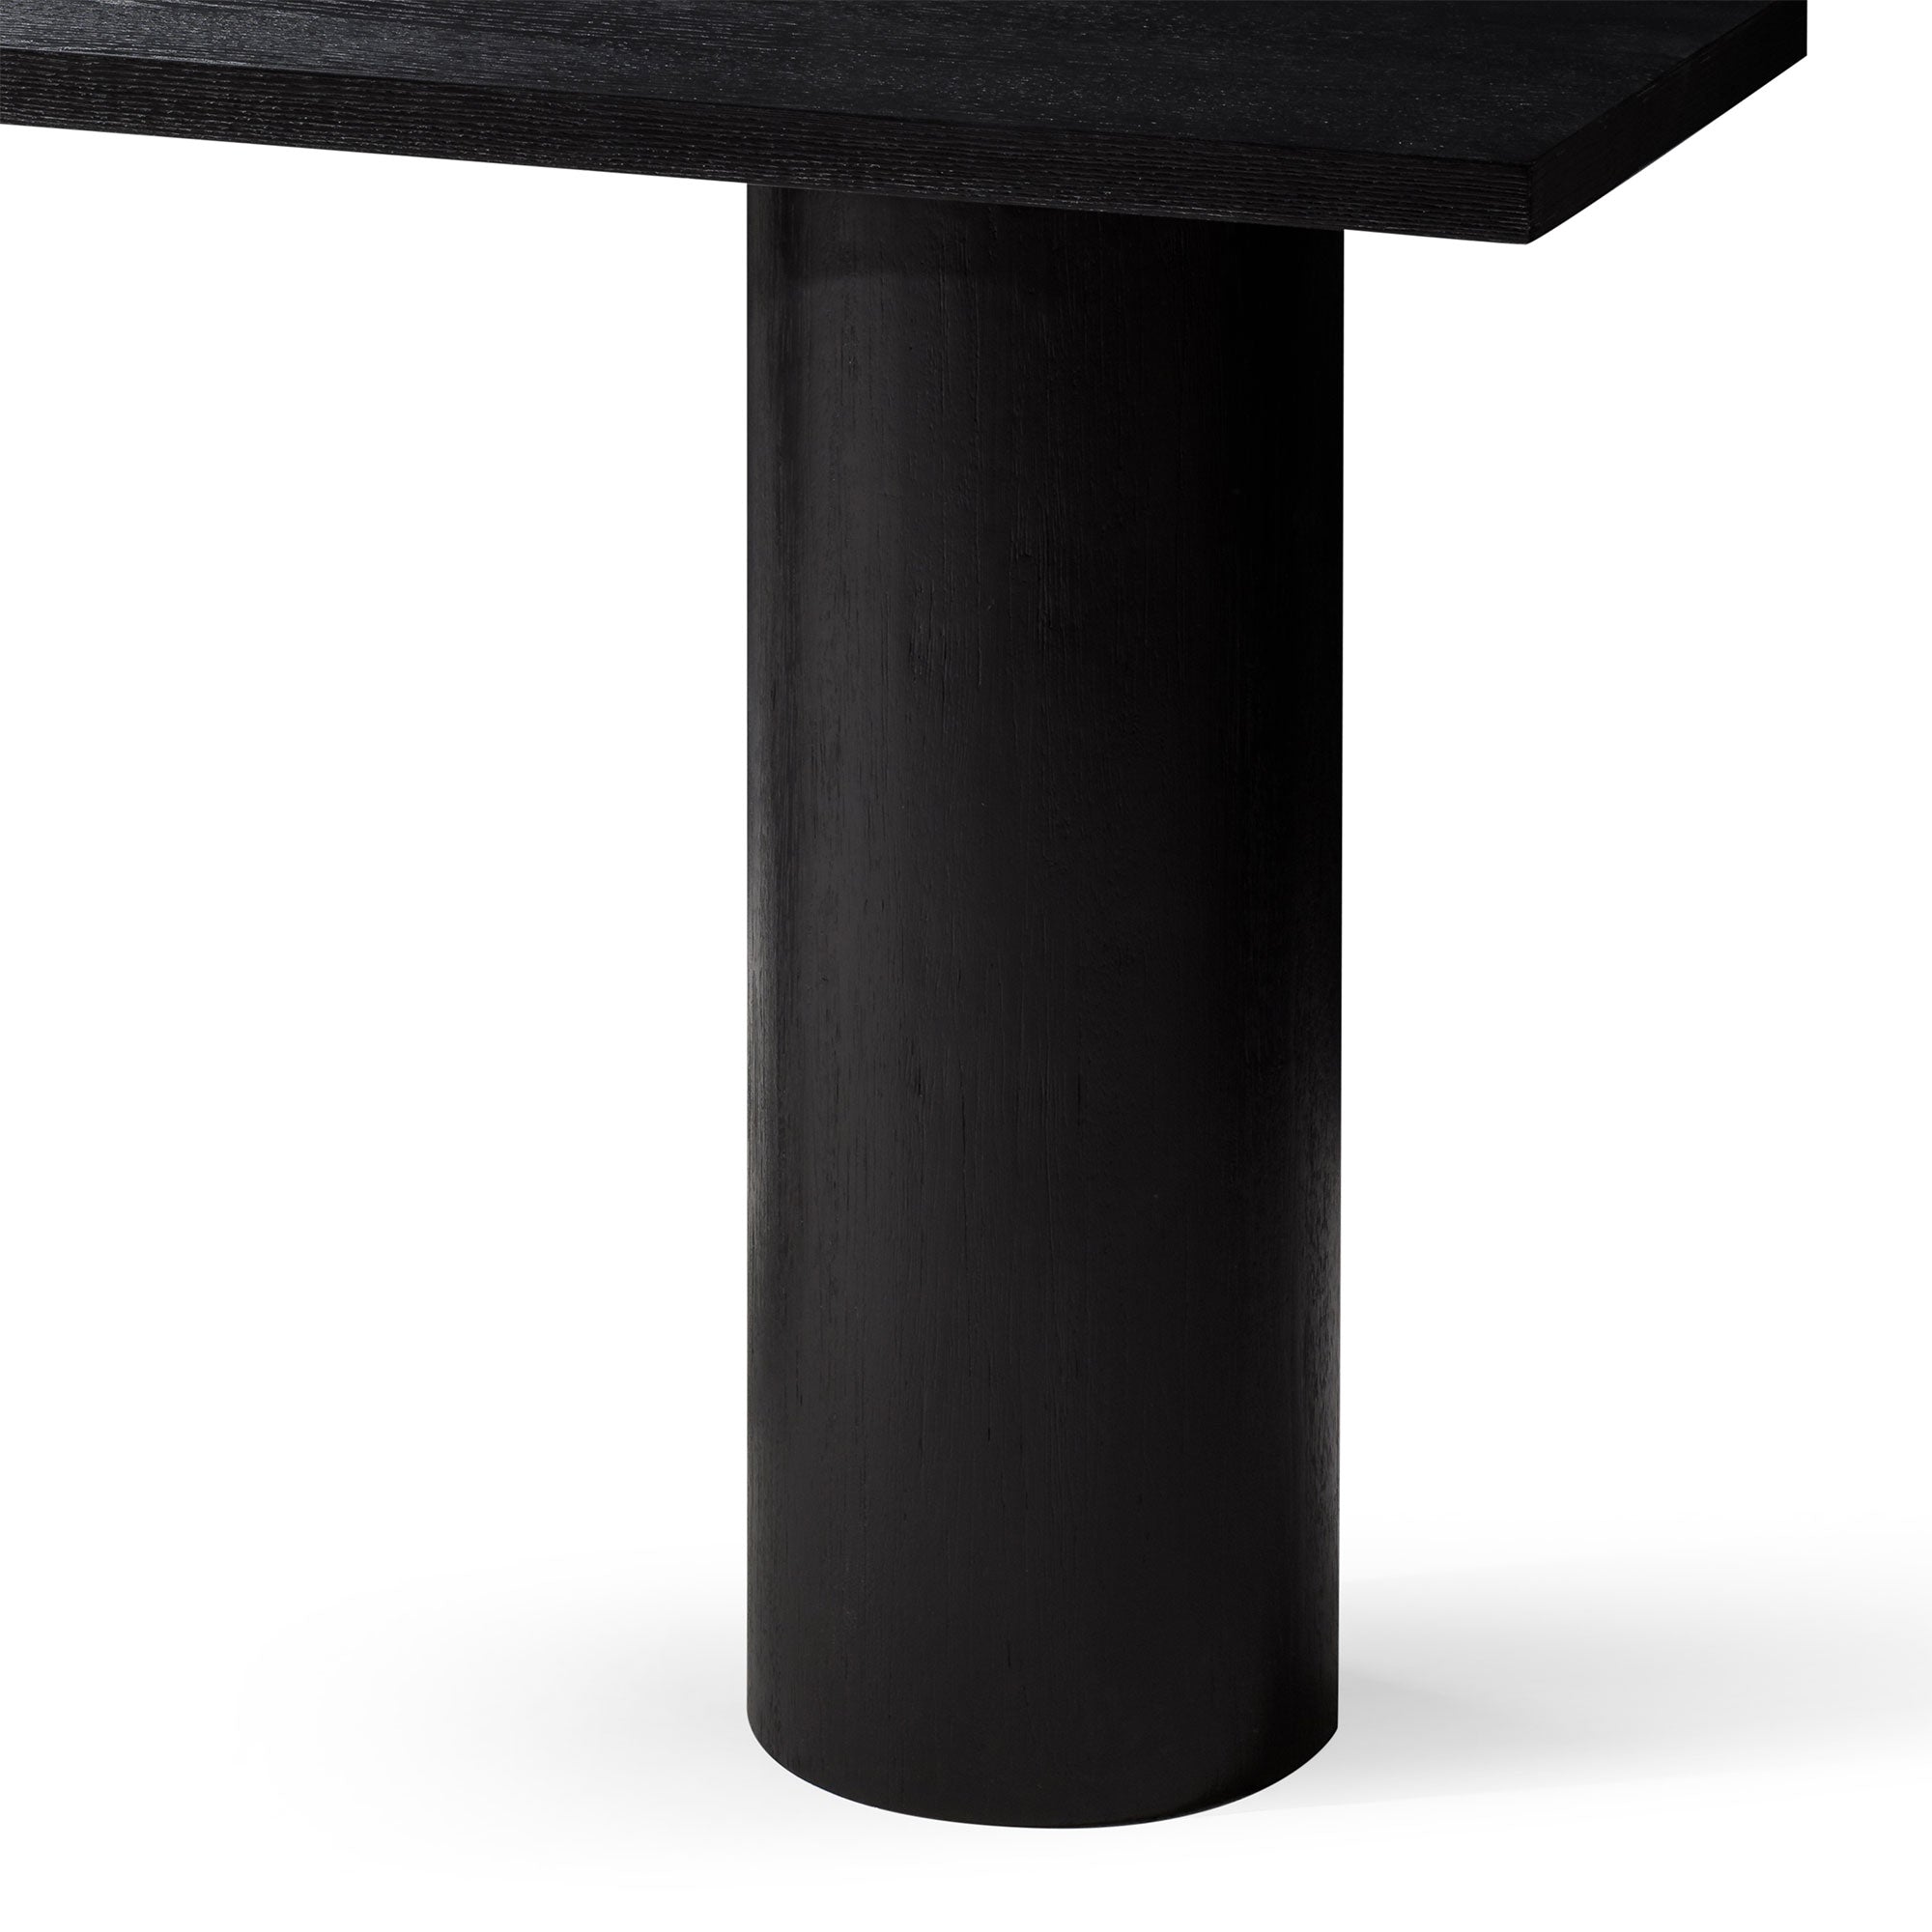 Lana Contemporary Wooden Console Table in Refined Black Finish in Accent Tables by Maven Lane